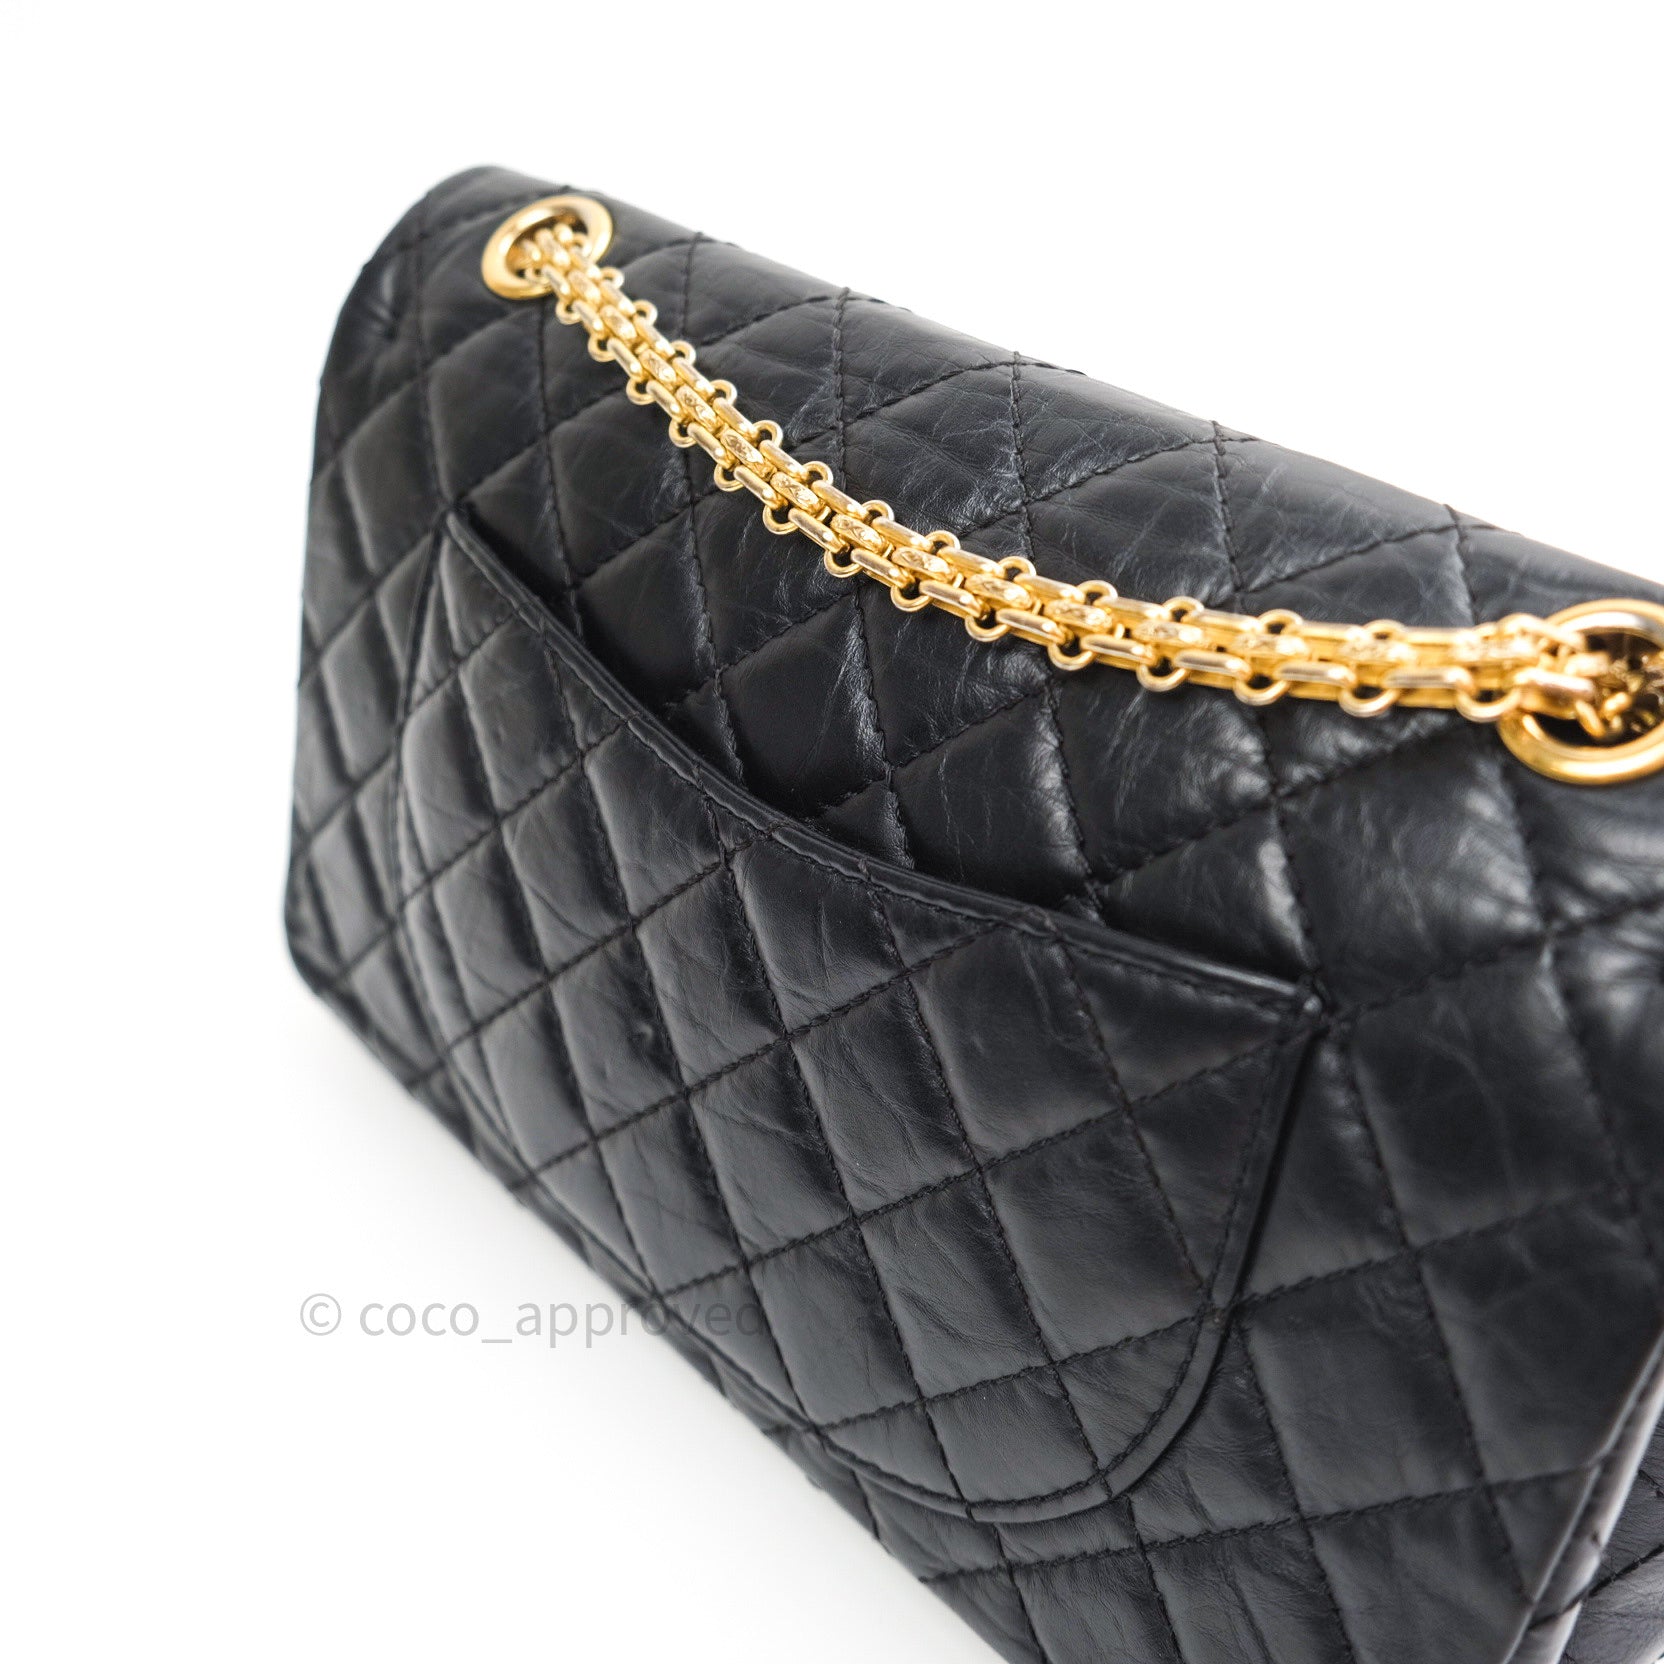 Chanel 2.55 Reissue Aged Calfskin Lucky Charms 225 Flap Black